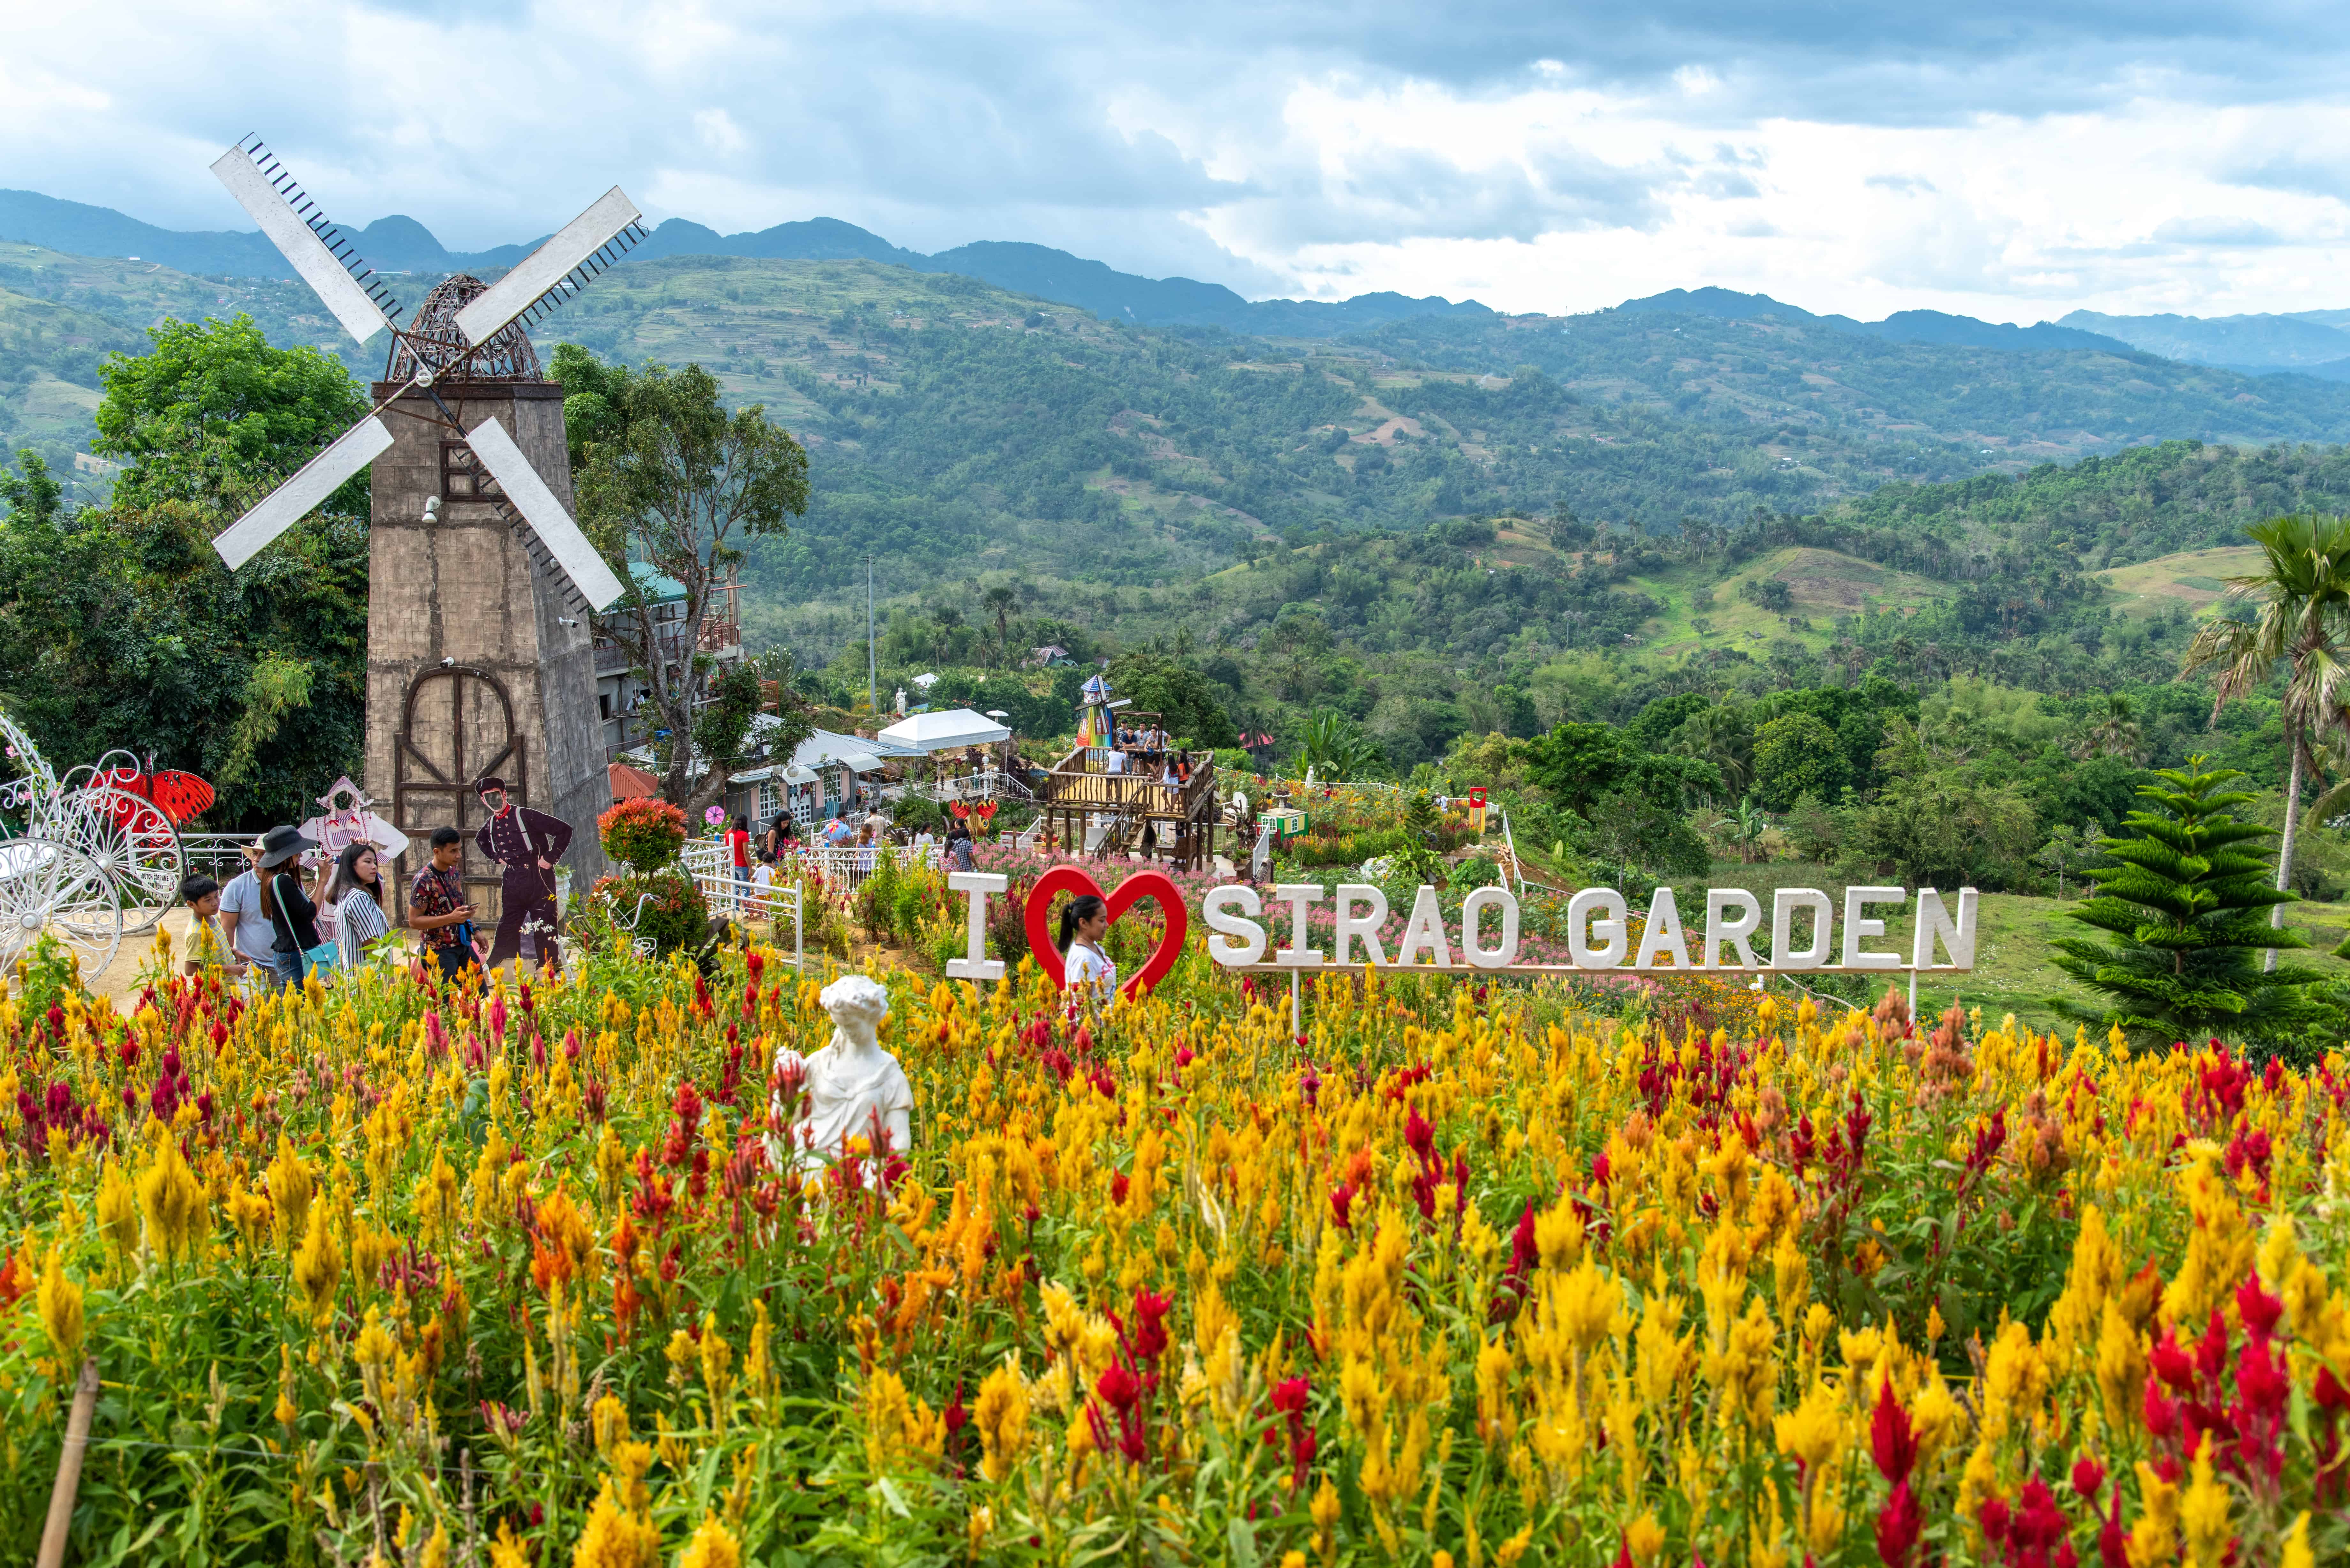 Cebu Itinerary Day 1: Afternoon - Sirao Garden - Cebu Itinerary: What to do in Cebu in 48 Hours